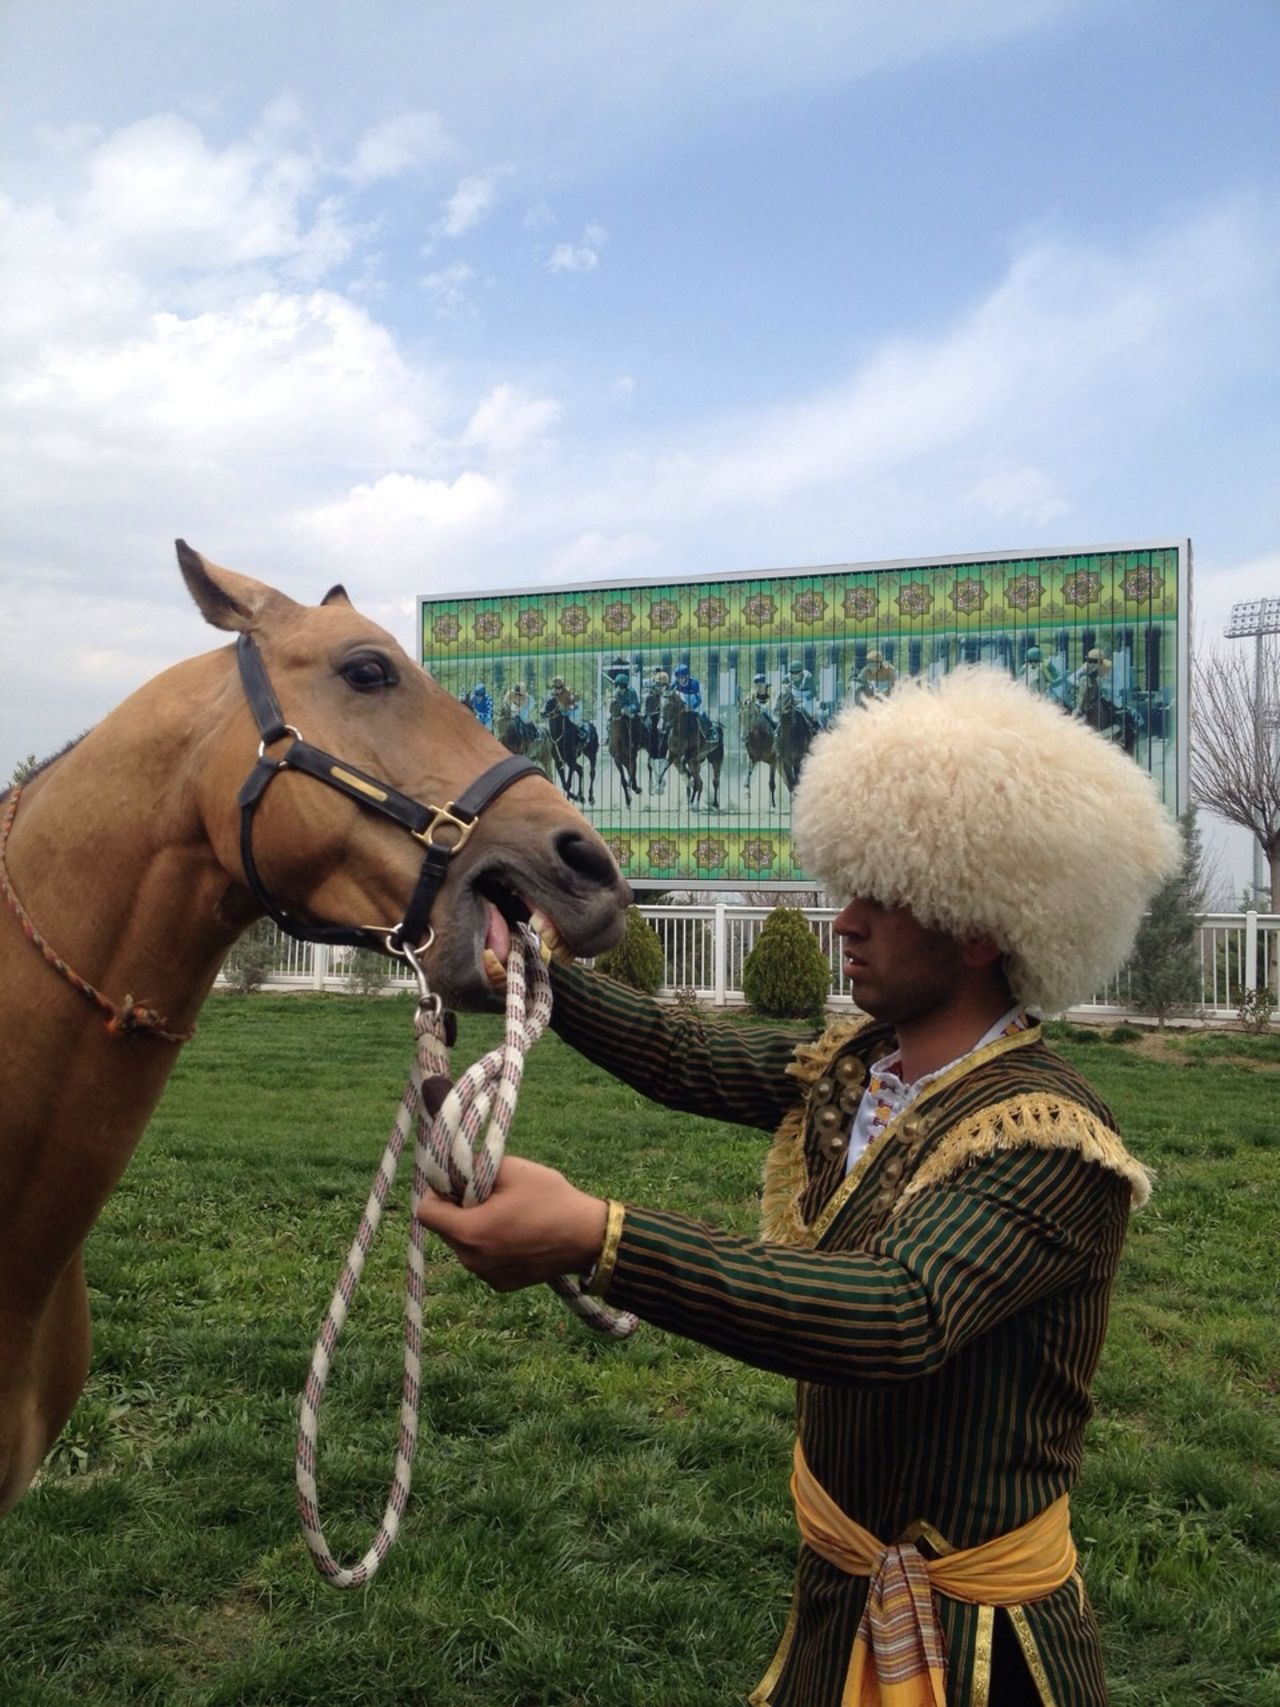 Turkmenistan -- inside one of the 'world's most repressive' states | CNN